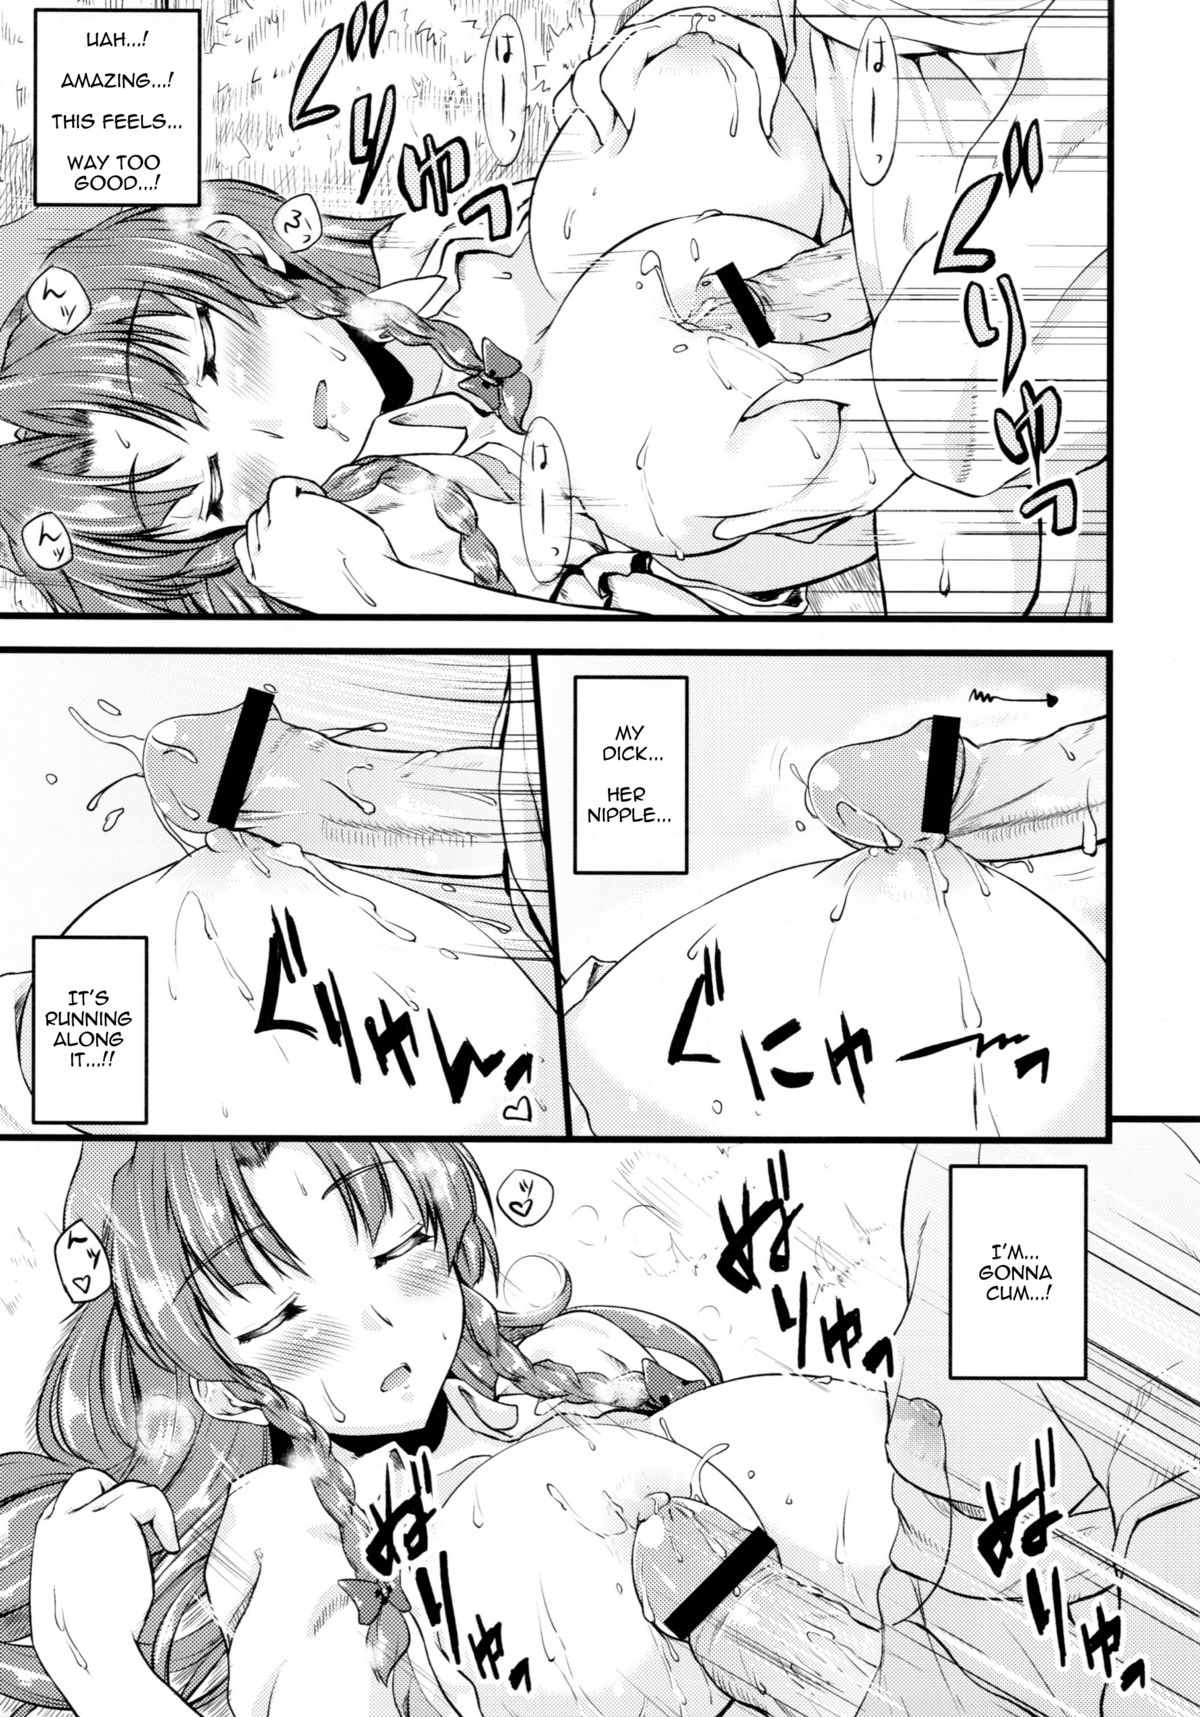 (Reitaisai 8) [from SCRATCH (Johnny)] Monban no Onee-san ga Aite Shite Ageru. | The Gatekeeper Lady is my Partner (Touhou Project) [English] [UMAD] page 11 full